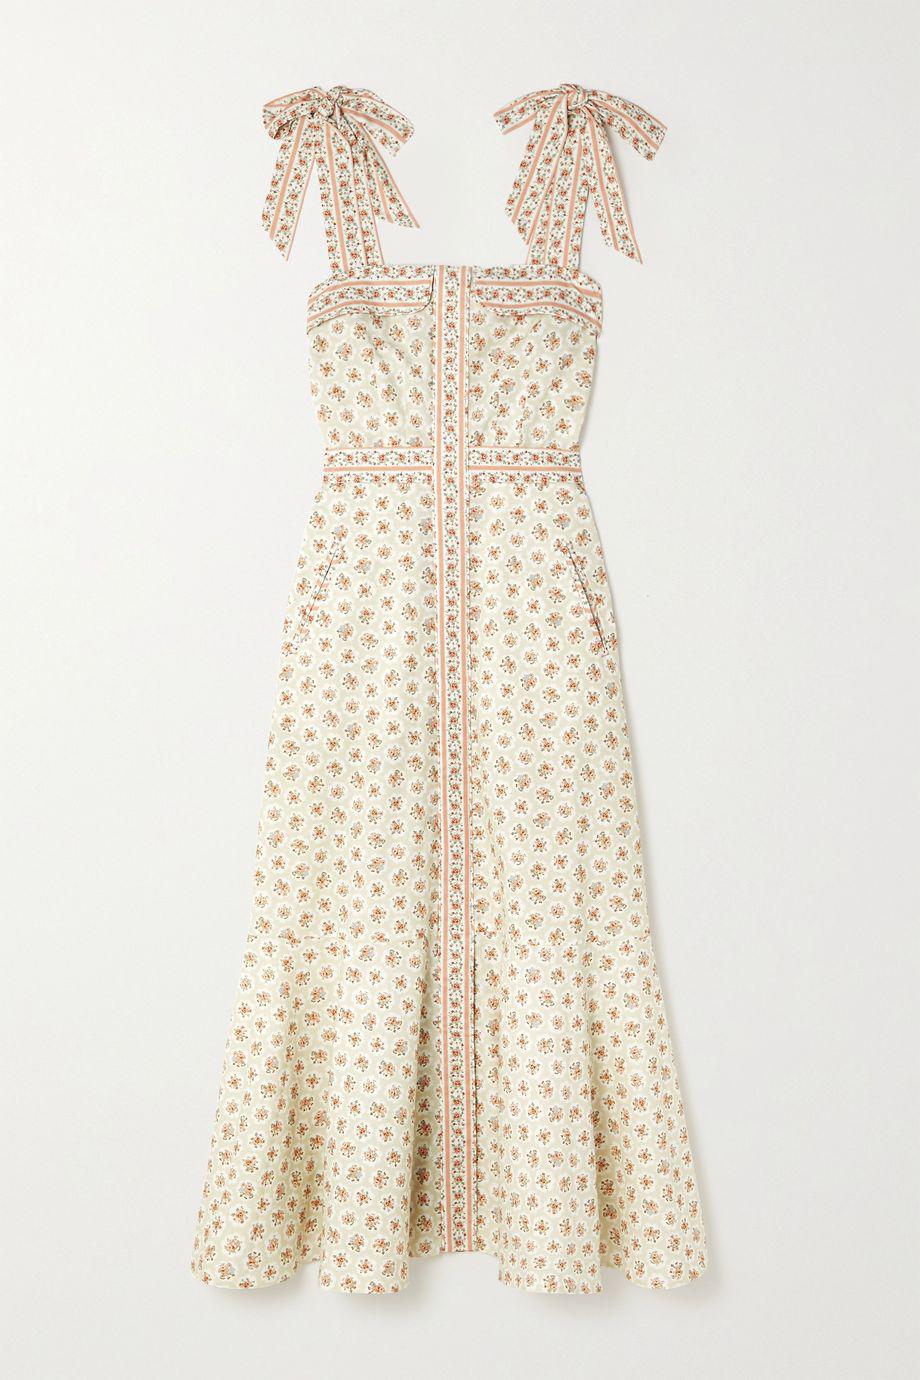 Olivia bow-detailed belted floral-print cotton-poplin midi dress by ANNA MASON